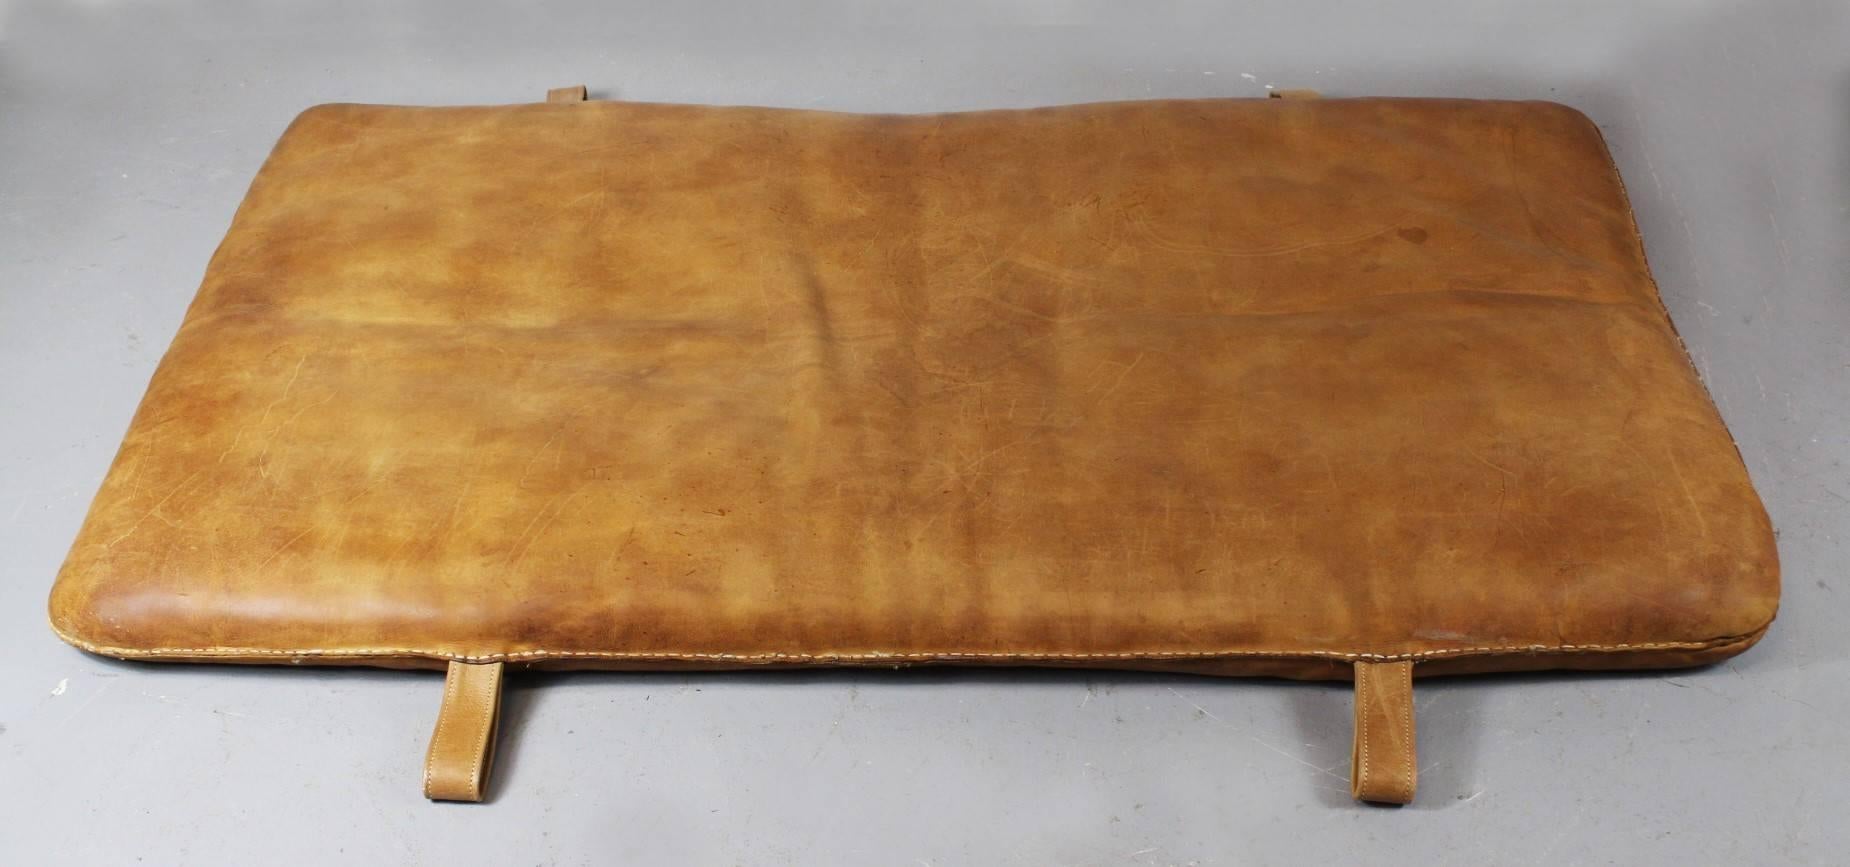 Vintage leather gym mat from the 1930s. The mat is in good original condition.